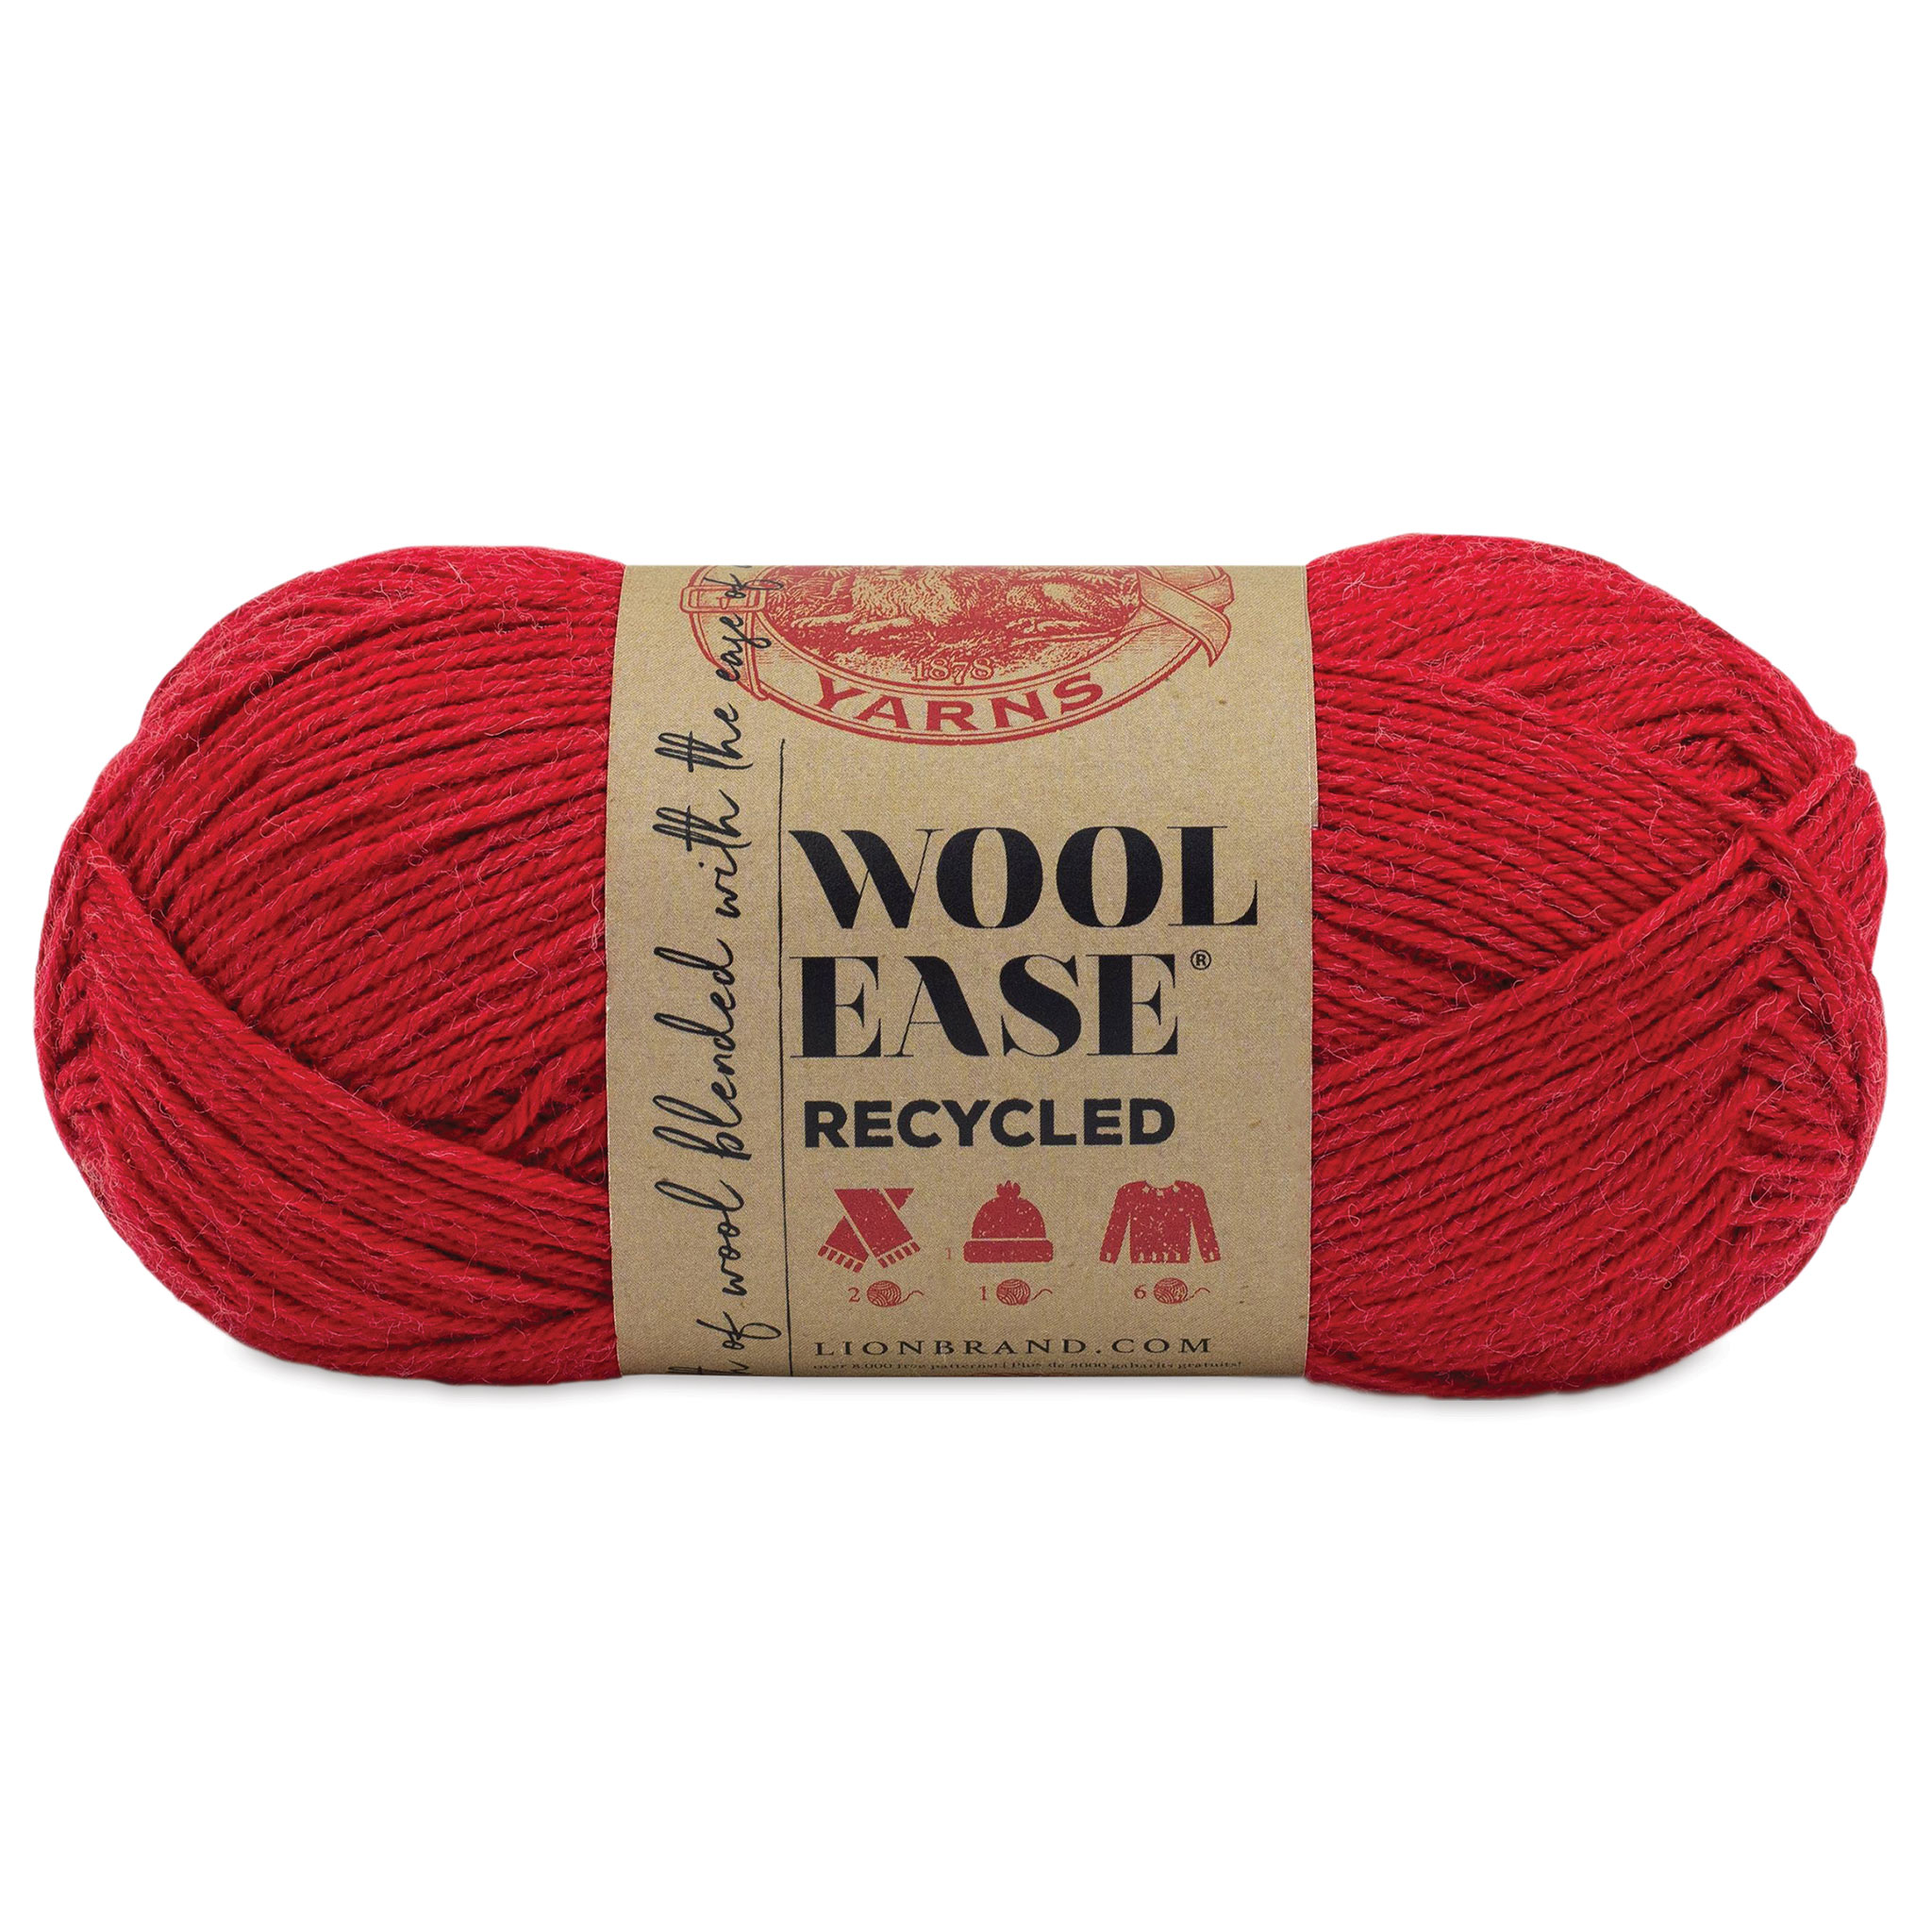 Lion Brand Wool Ease Recycled Yarn | BLICK Art Materials